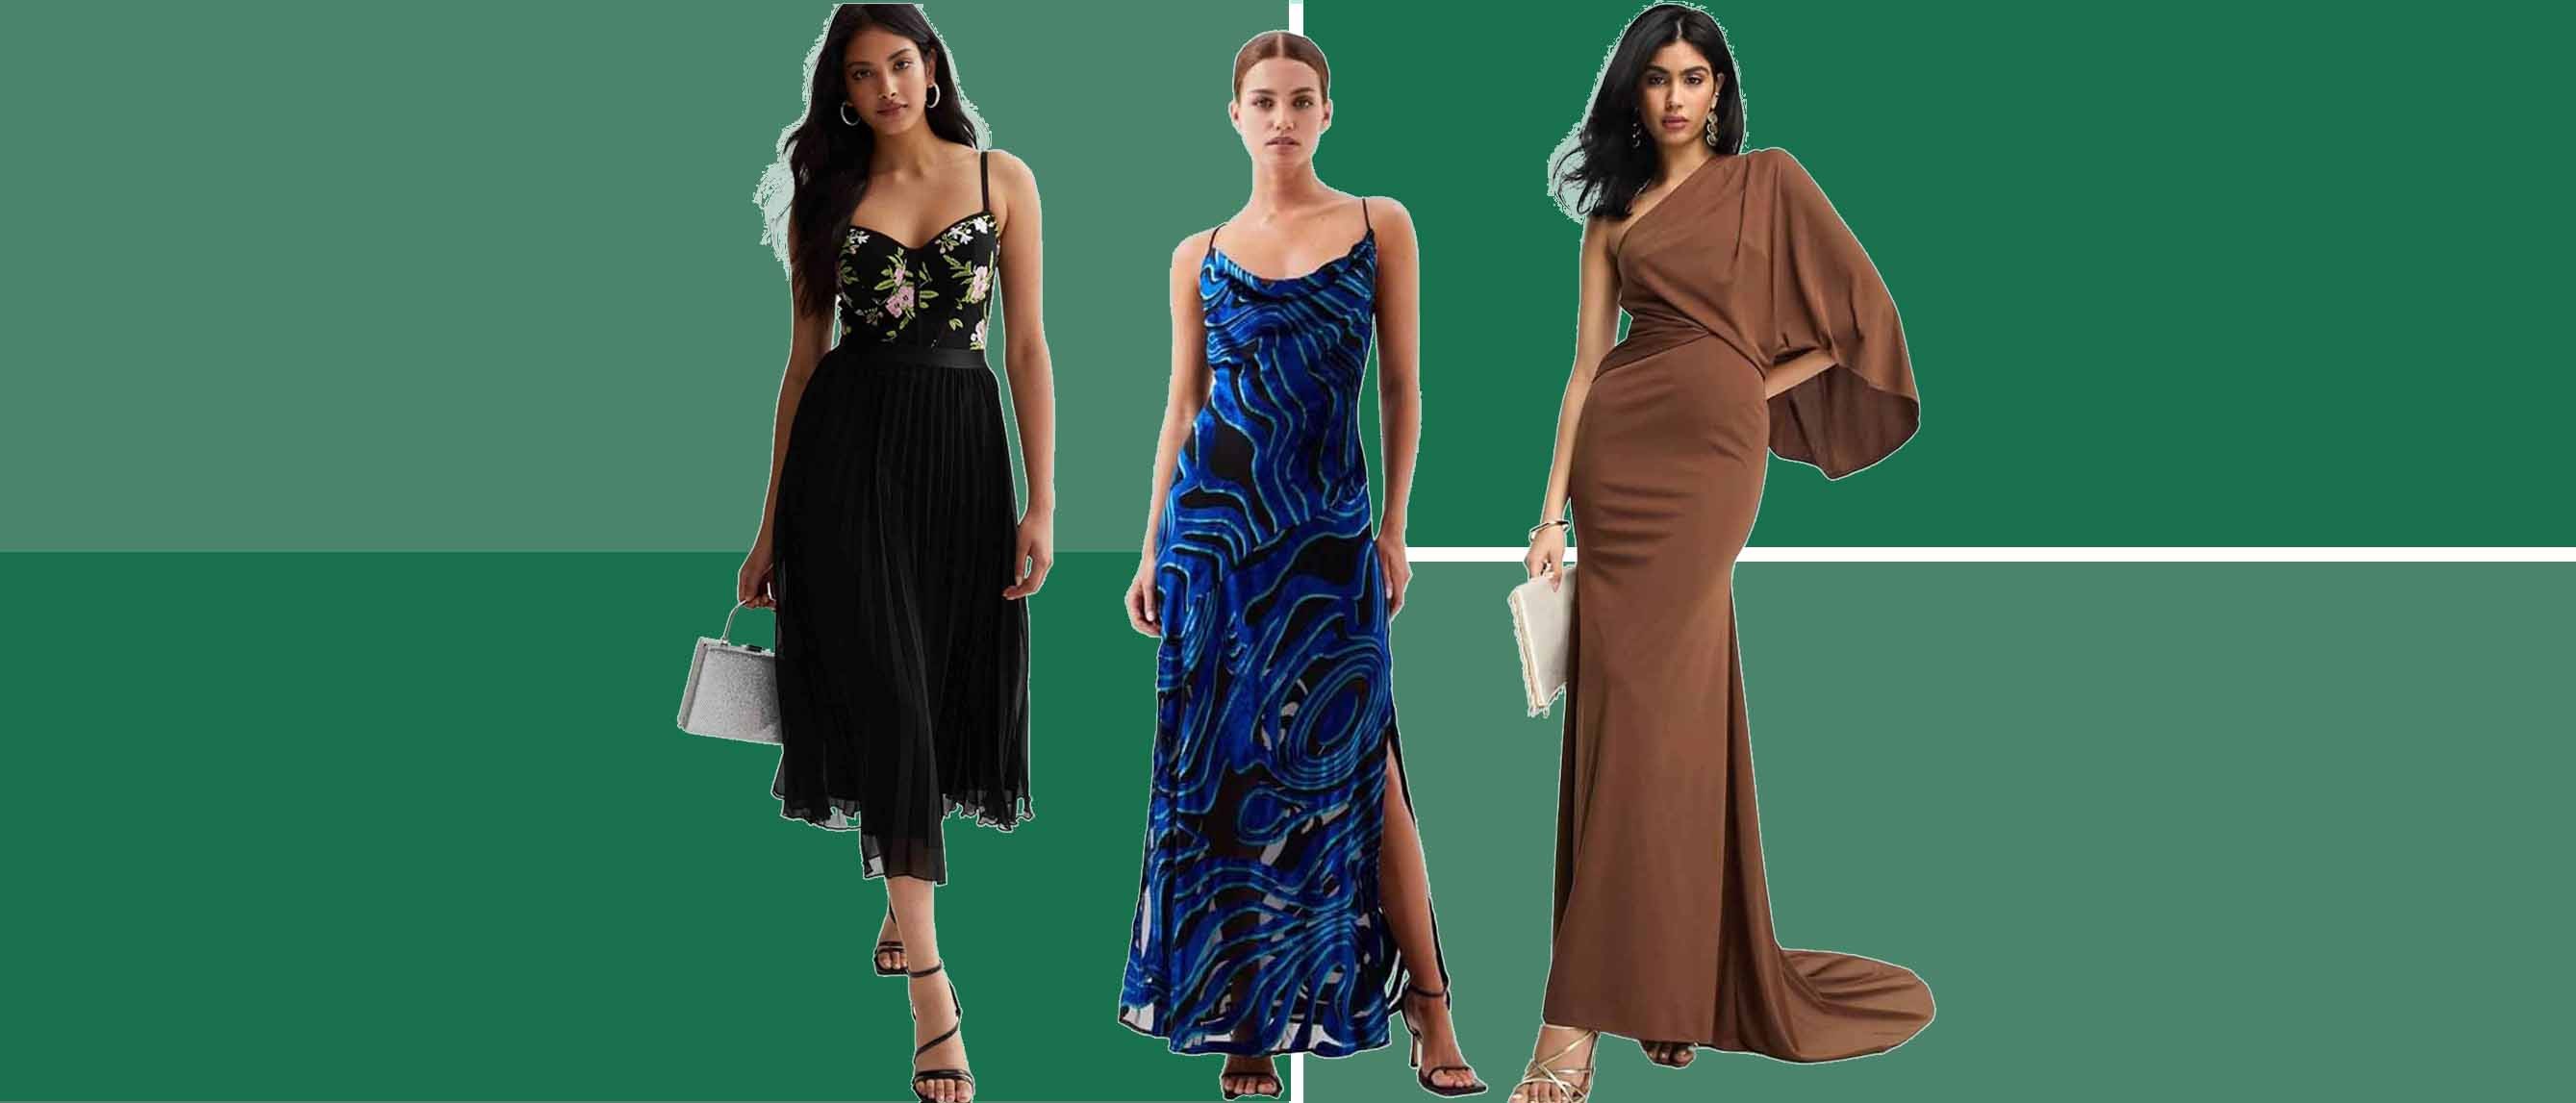 Turn heads this autumn in a knock-out wedding guest dress